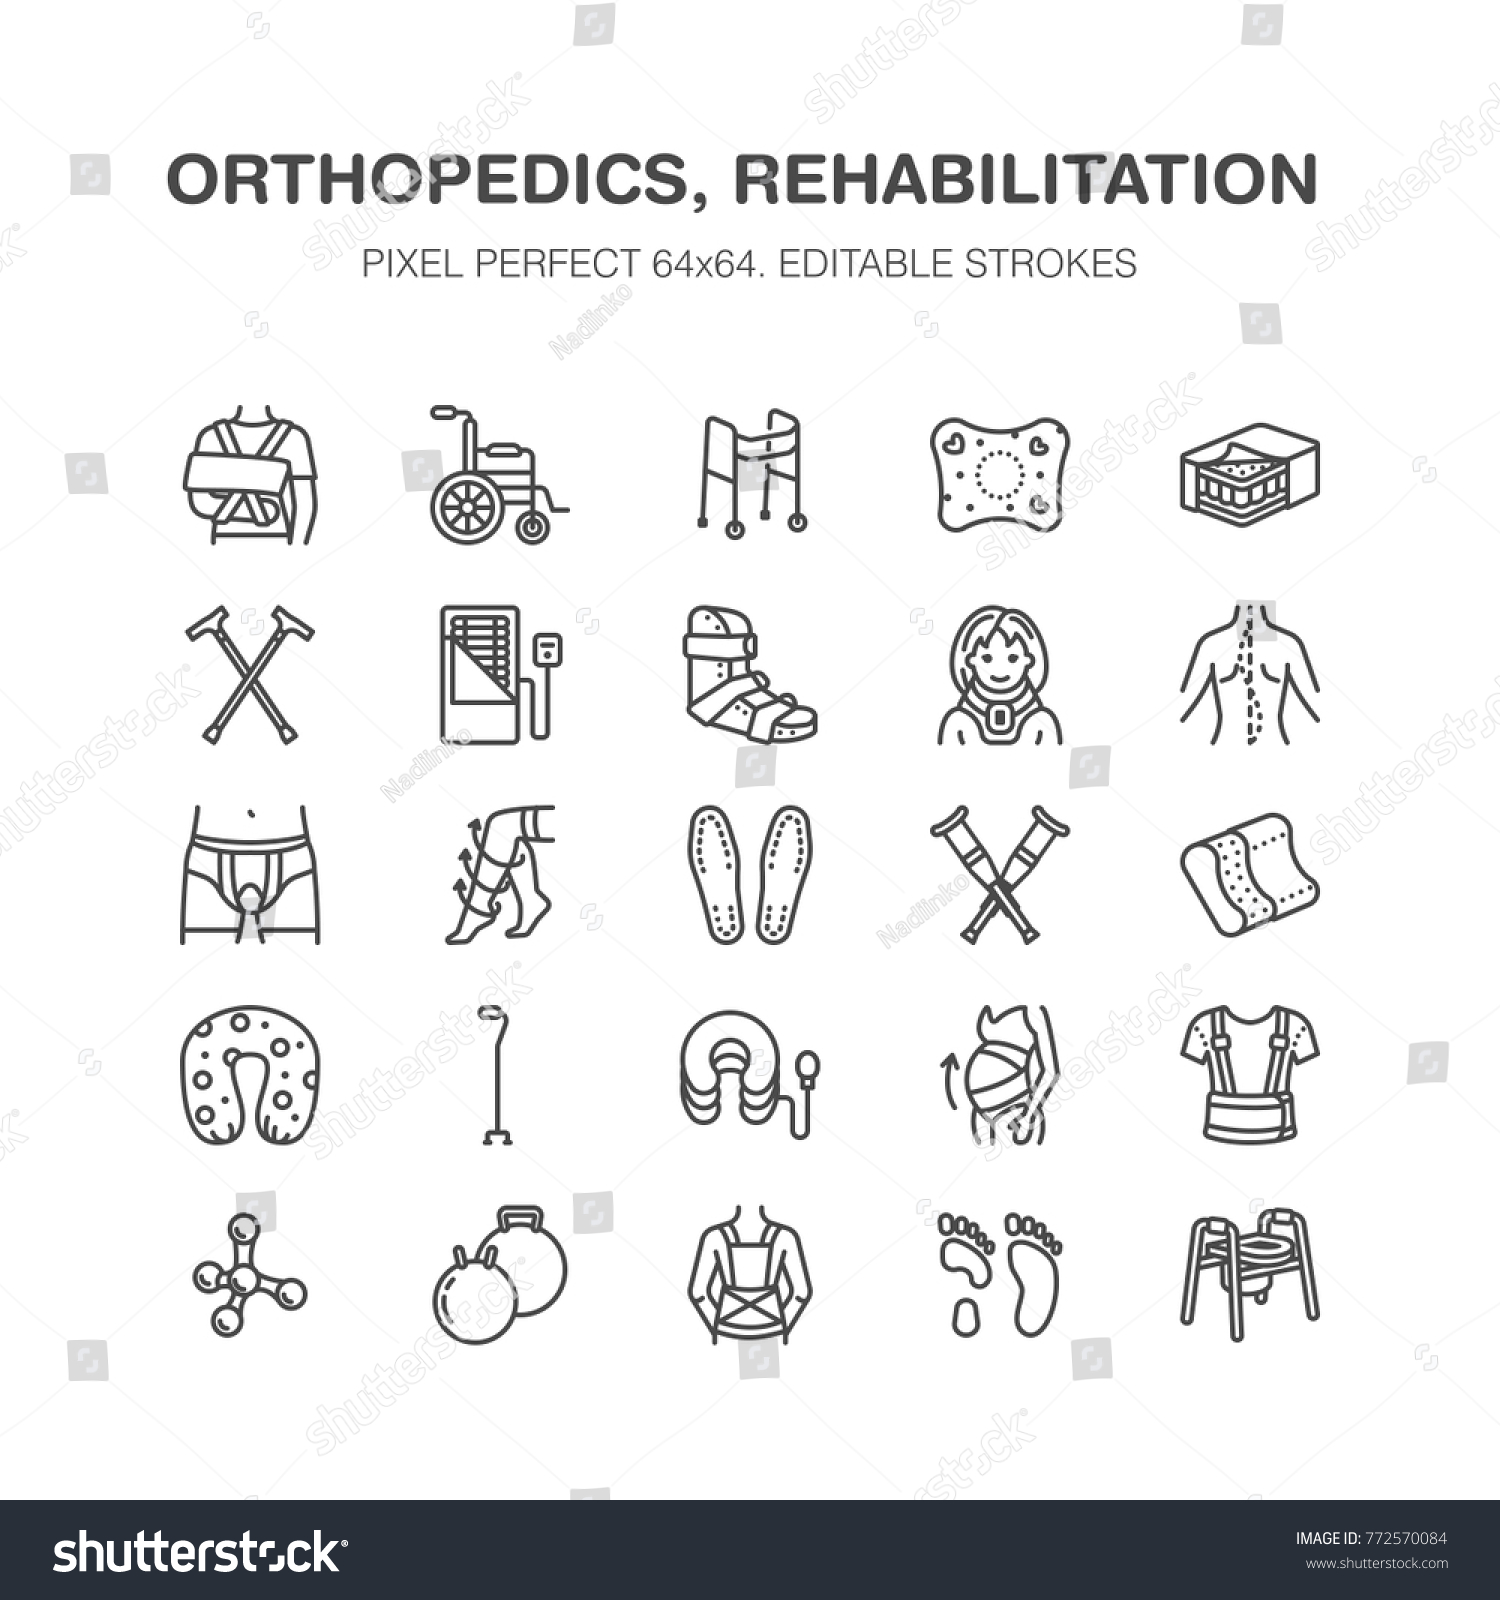 SVG of Orthopedics, trauma rehabilitation line icons. Crutches, mattress pillow, cervical collar, walkers, medical rehab goods. Health care thin linear signs for clinic and hospital. Pixel perfect 64x64. svg